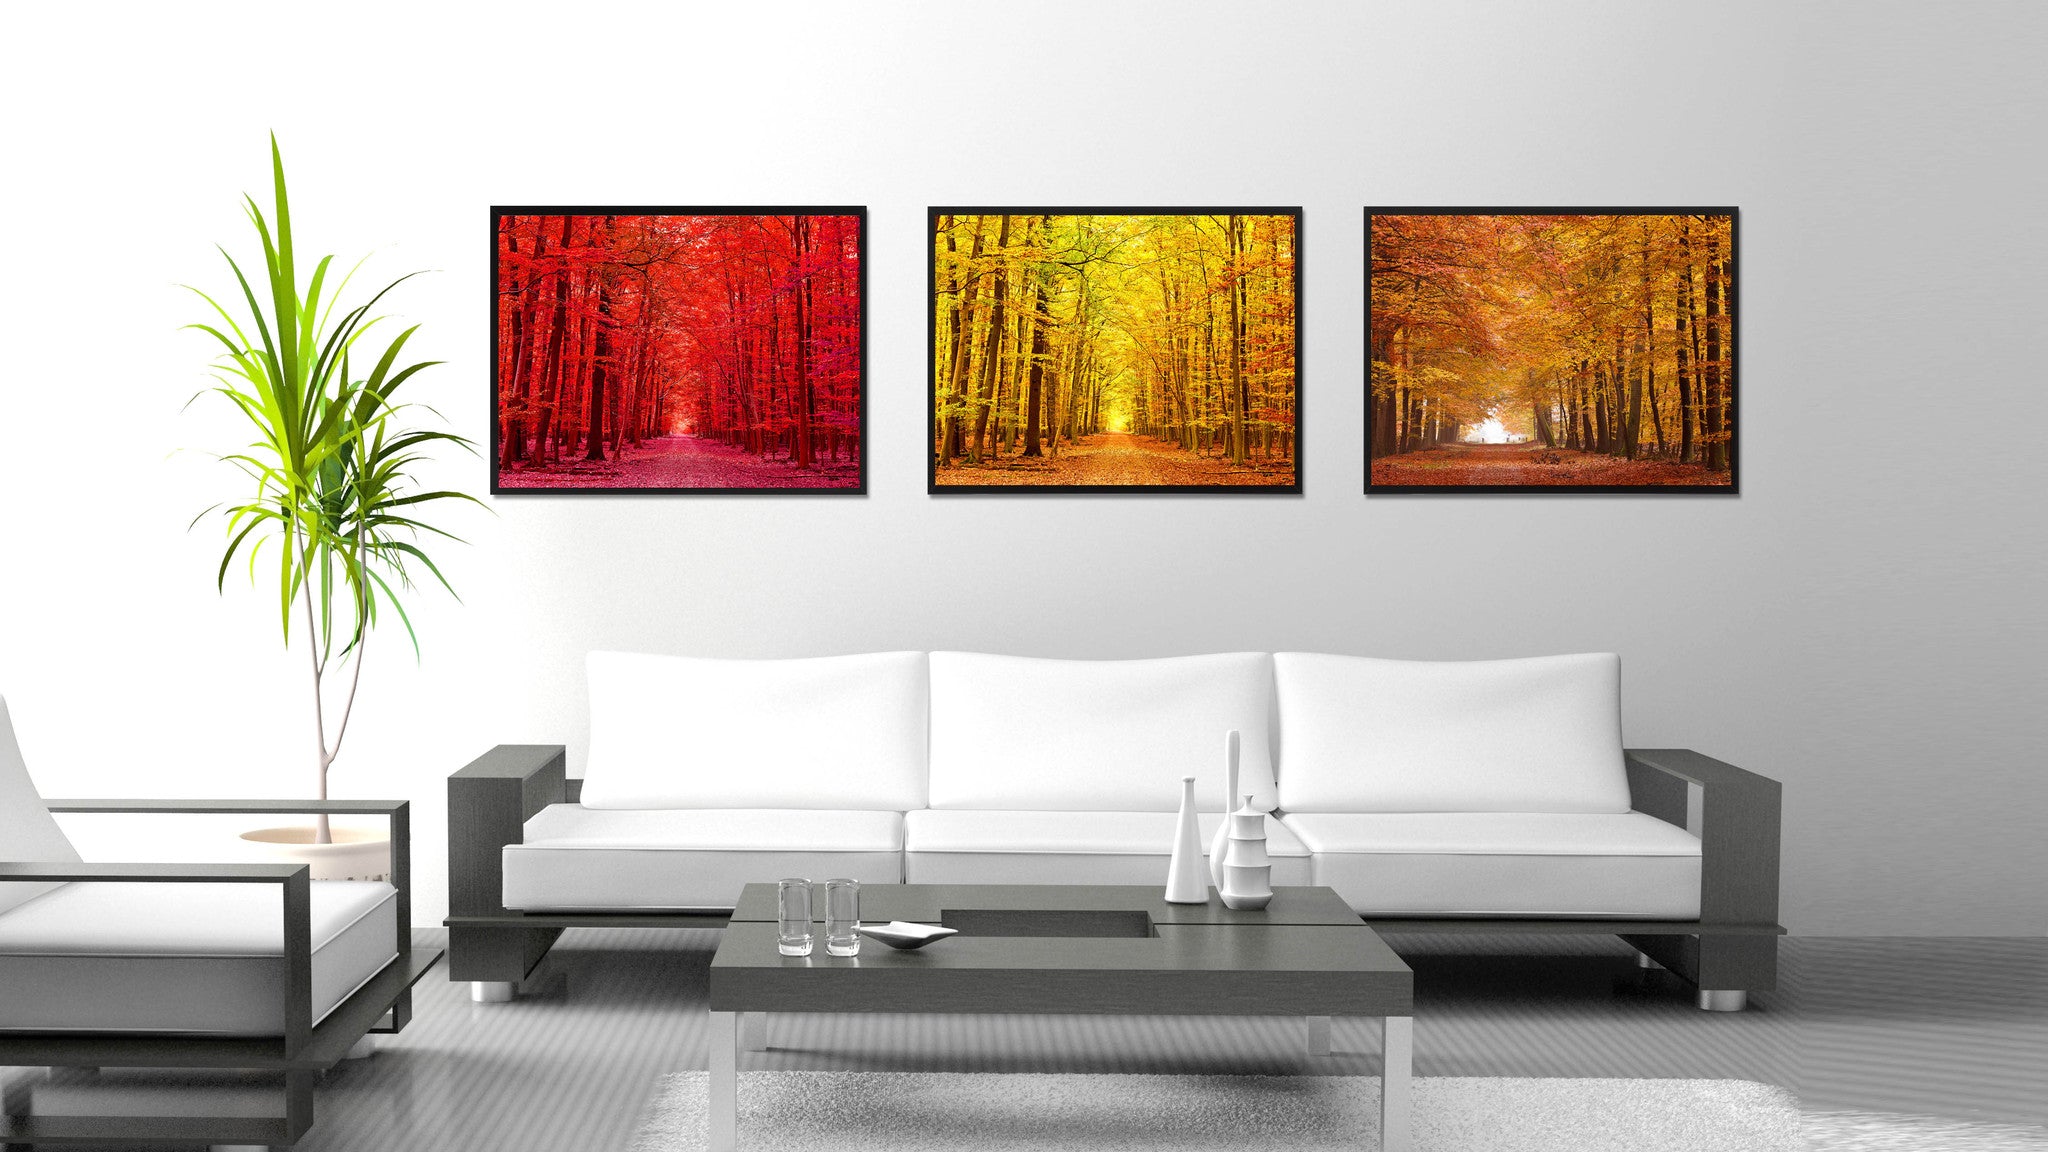 Autumn Road Red Landscape Photo Canvas Print Pictures Frames Home Décor Wall Art Gifts